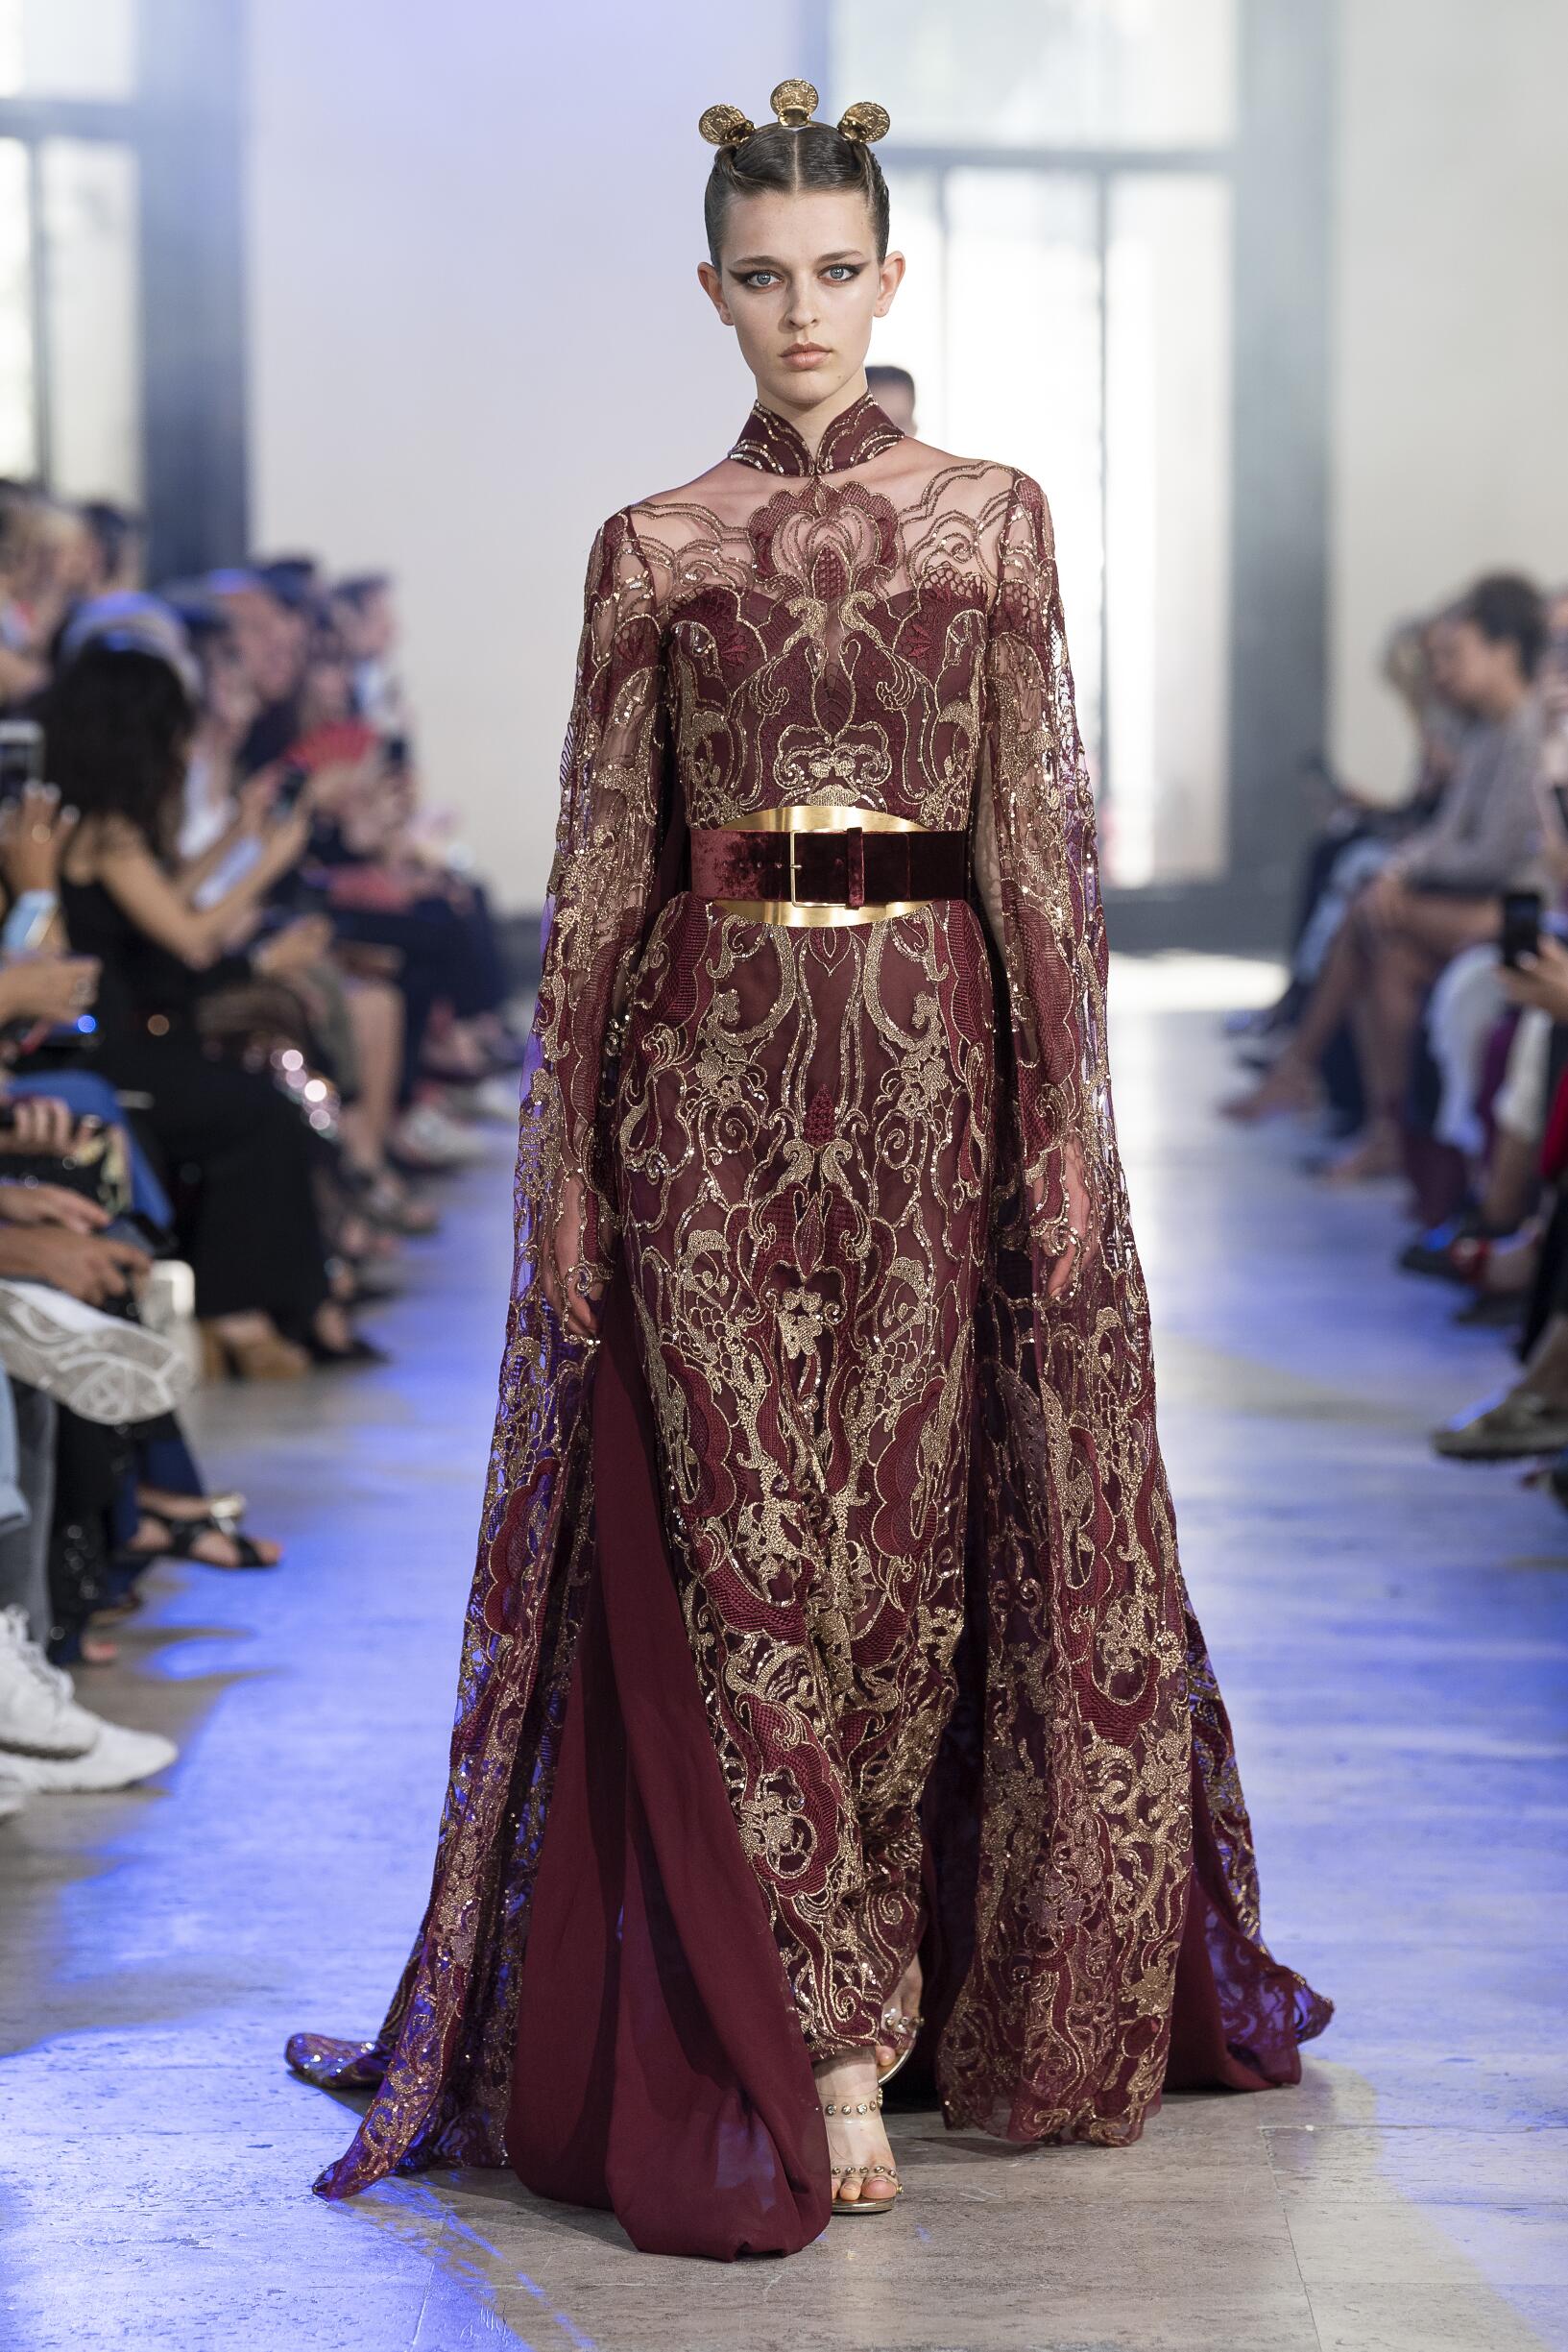 ELIE SAAB HAUTE COUTURE FALL WINTER 2019-20 COLLECTION | The Skinny Beep